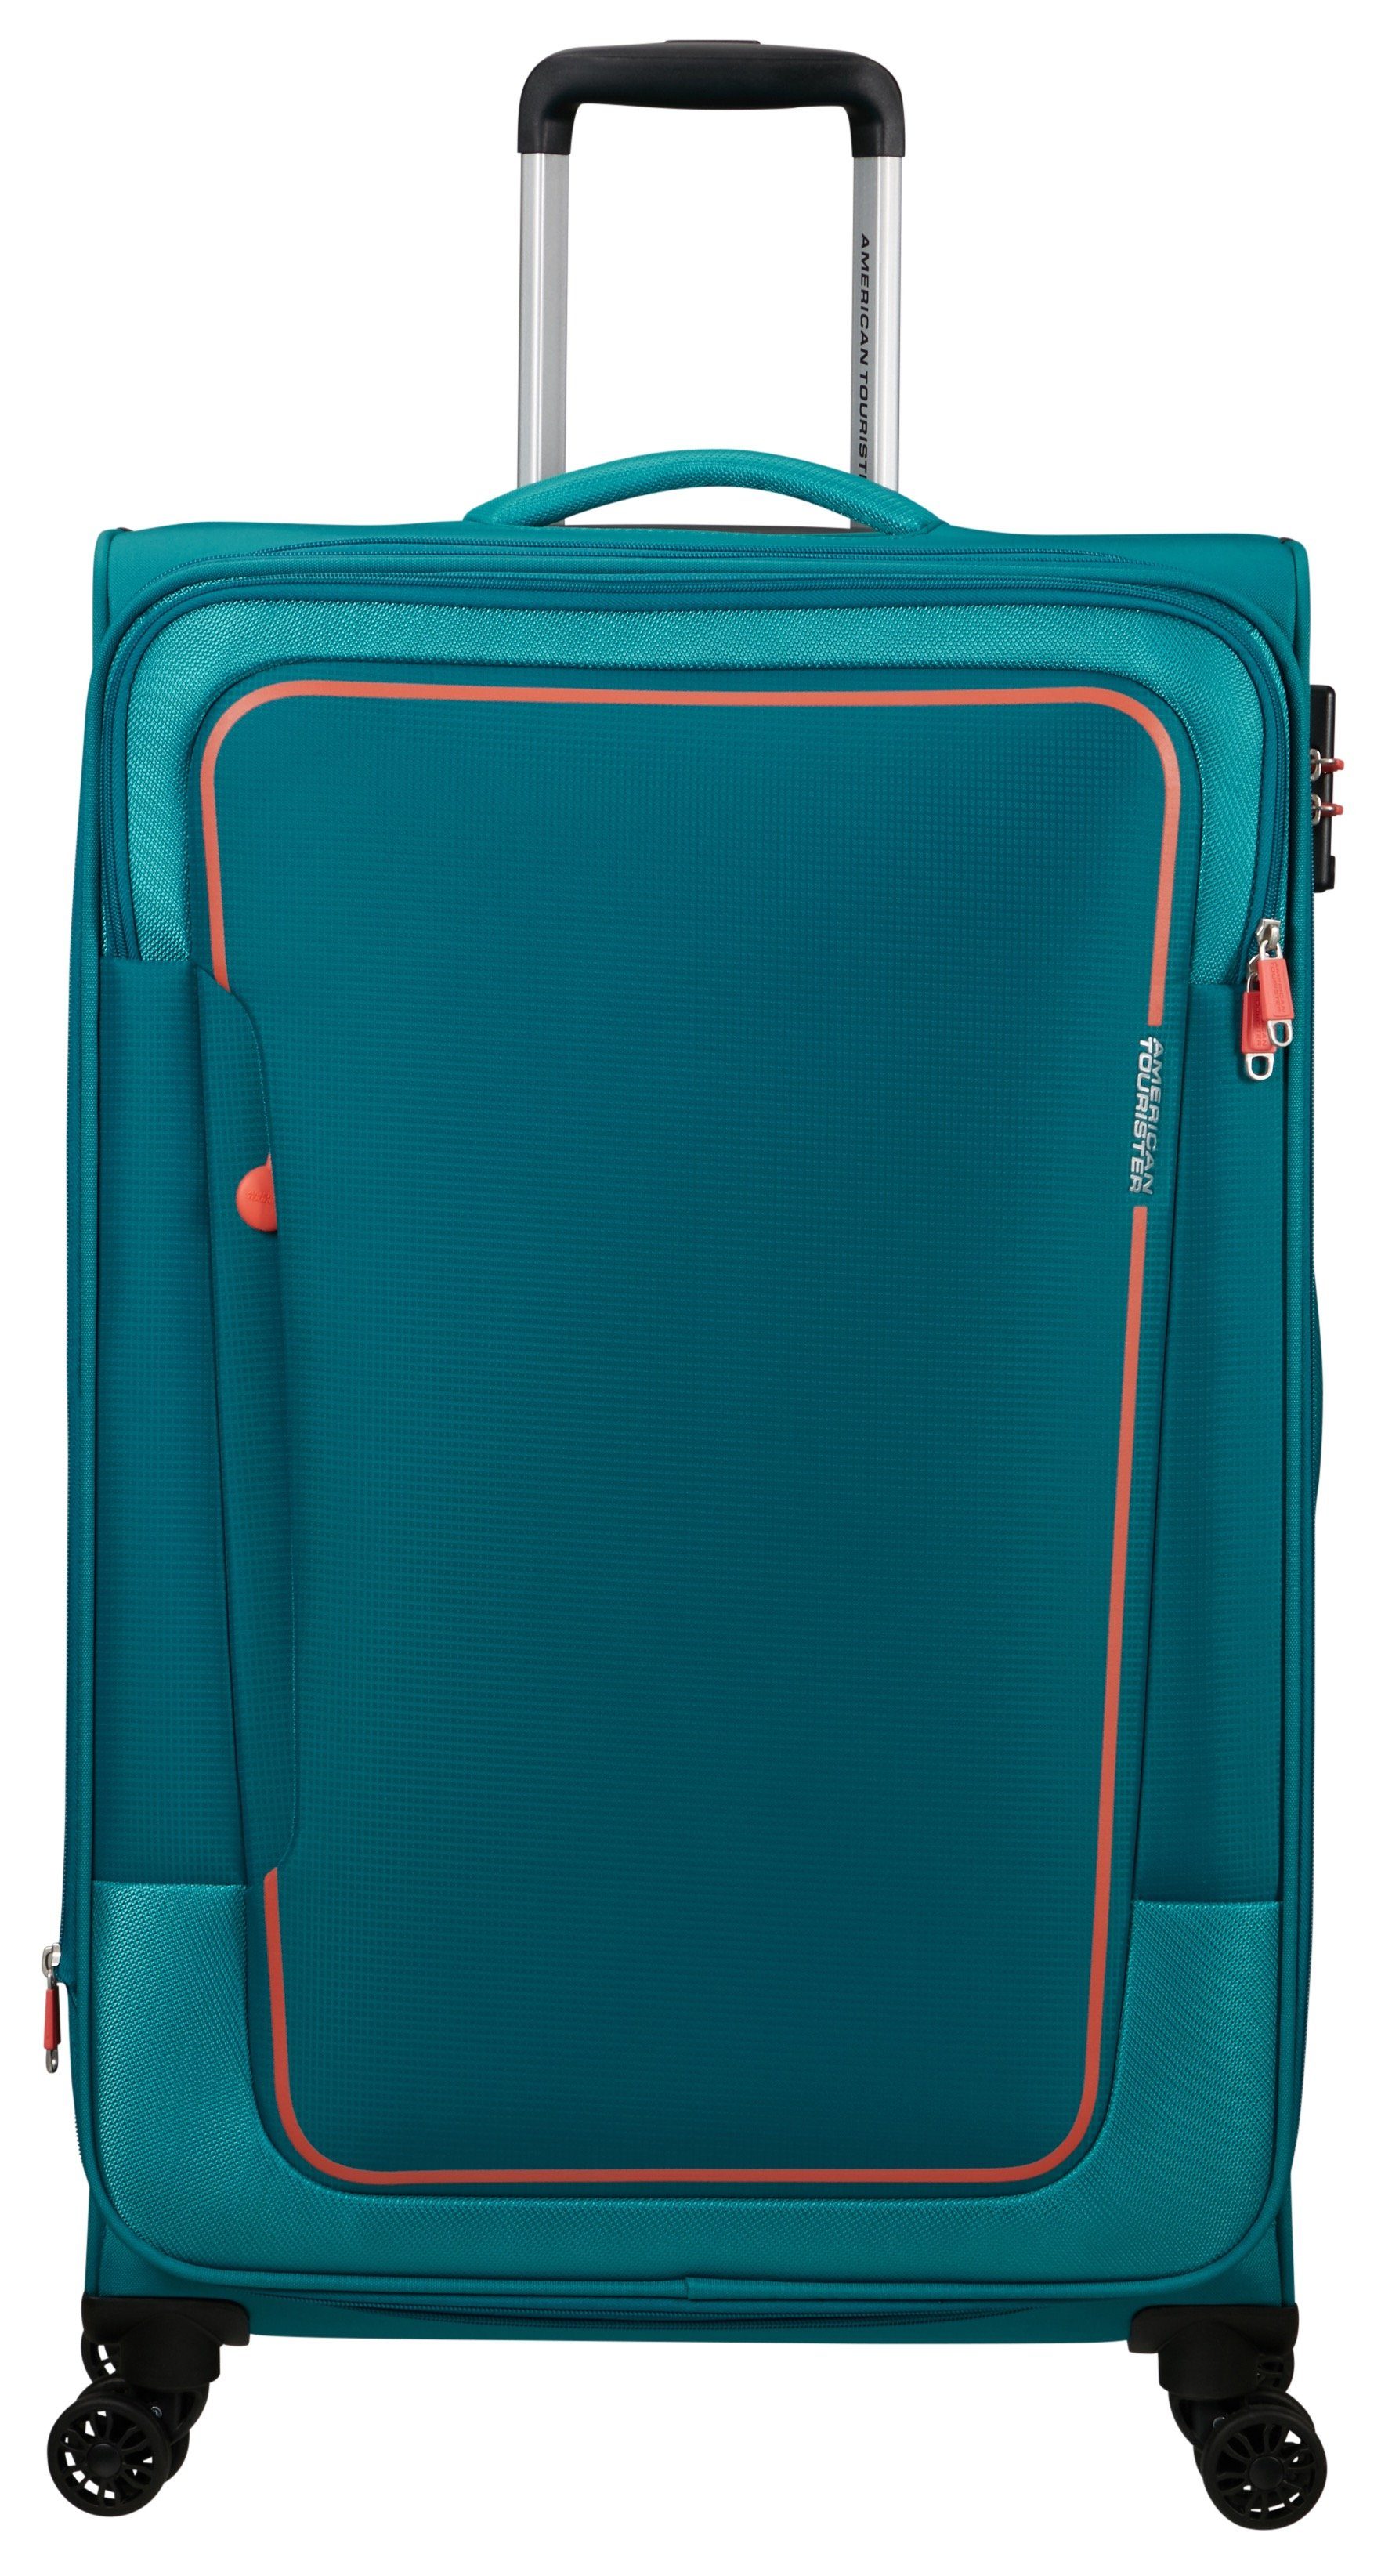 American Tourister® Koffer PULSONIC Spinner 80, 4 Rollen stone teal